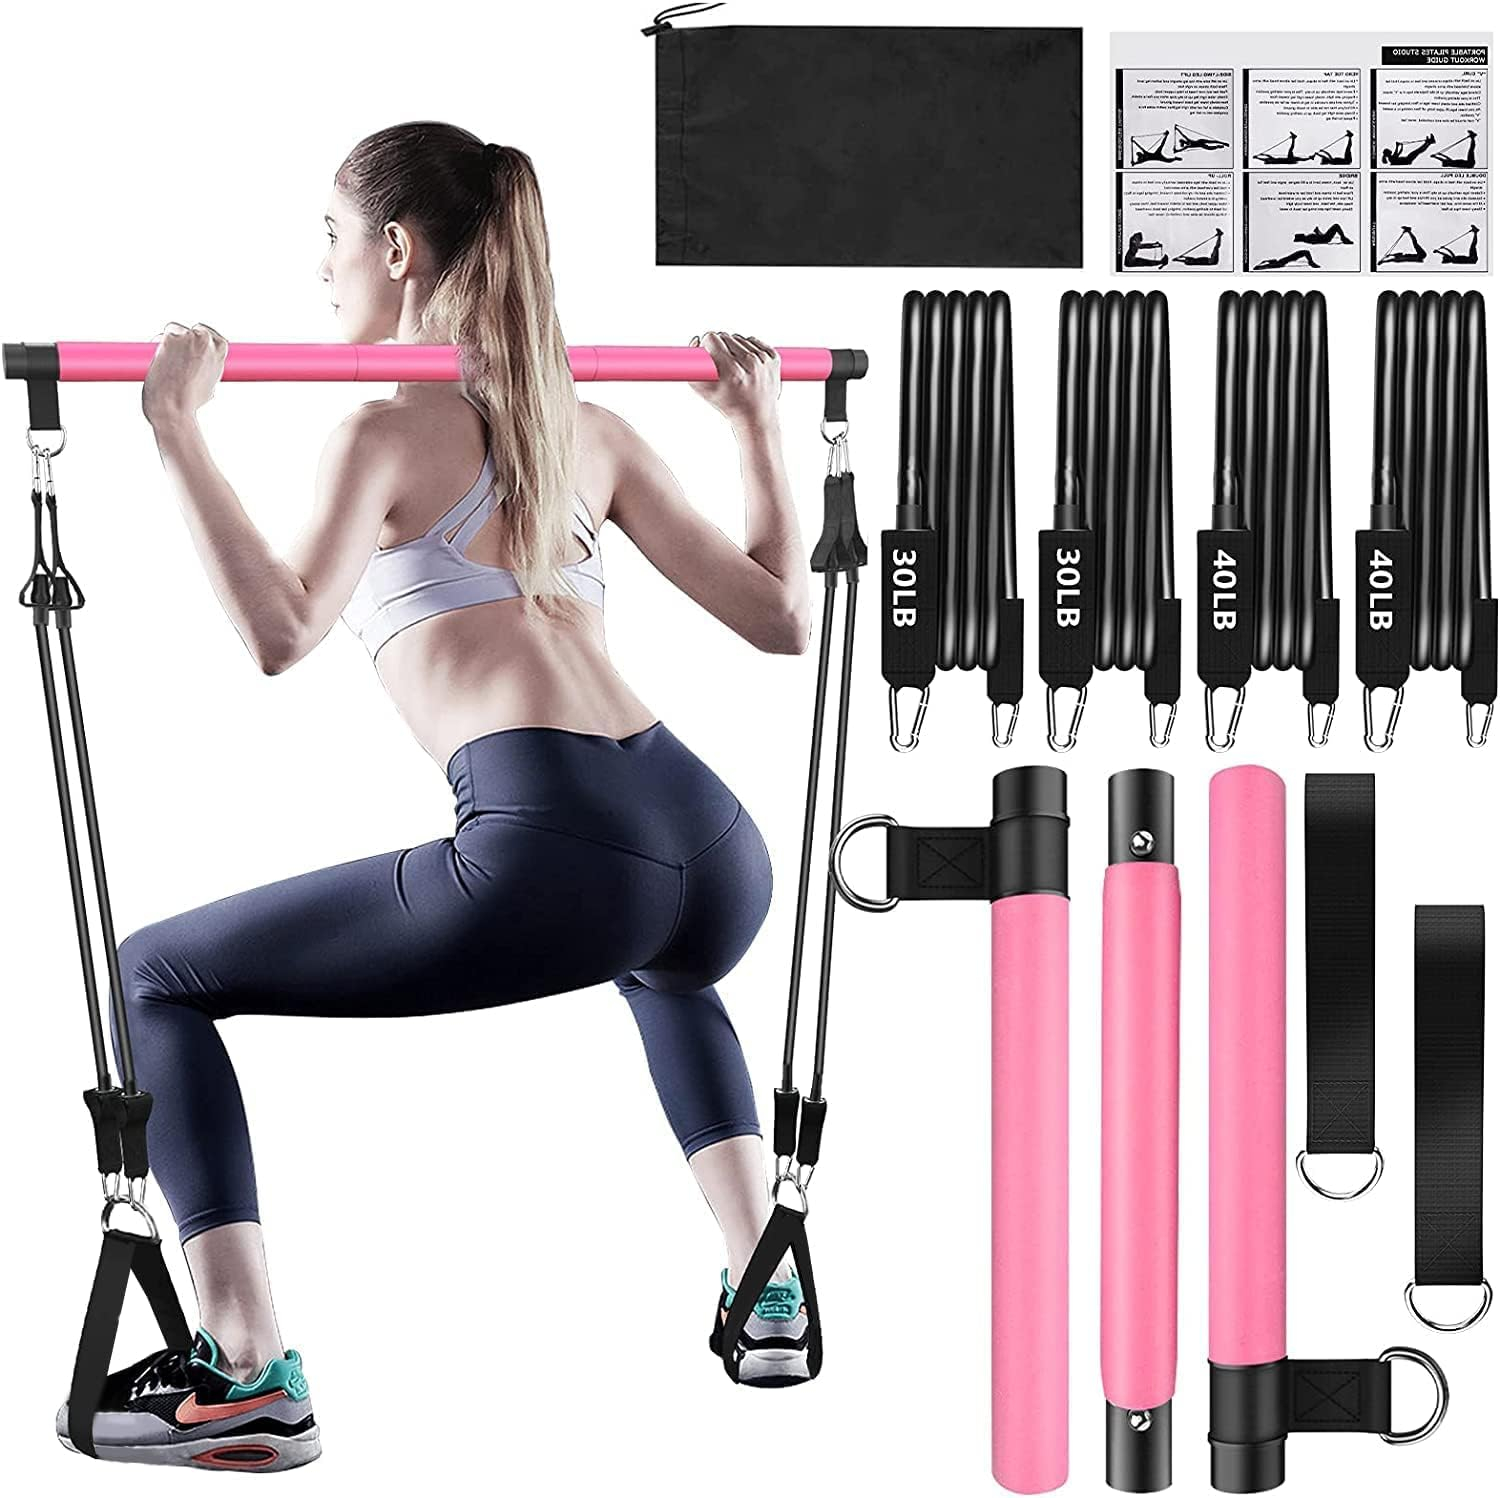 Bbtops Pilates Bar Kit with Resistance Bands,3-Section Pilates Bar with Stackable Bands Workout Equipment for Legs,Hip,Waist and Arm,Exercise Fitness Equipment for Women  Men Home Gym Yoga Pilates